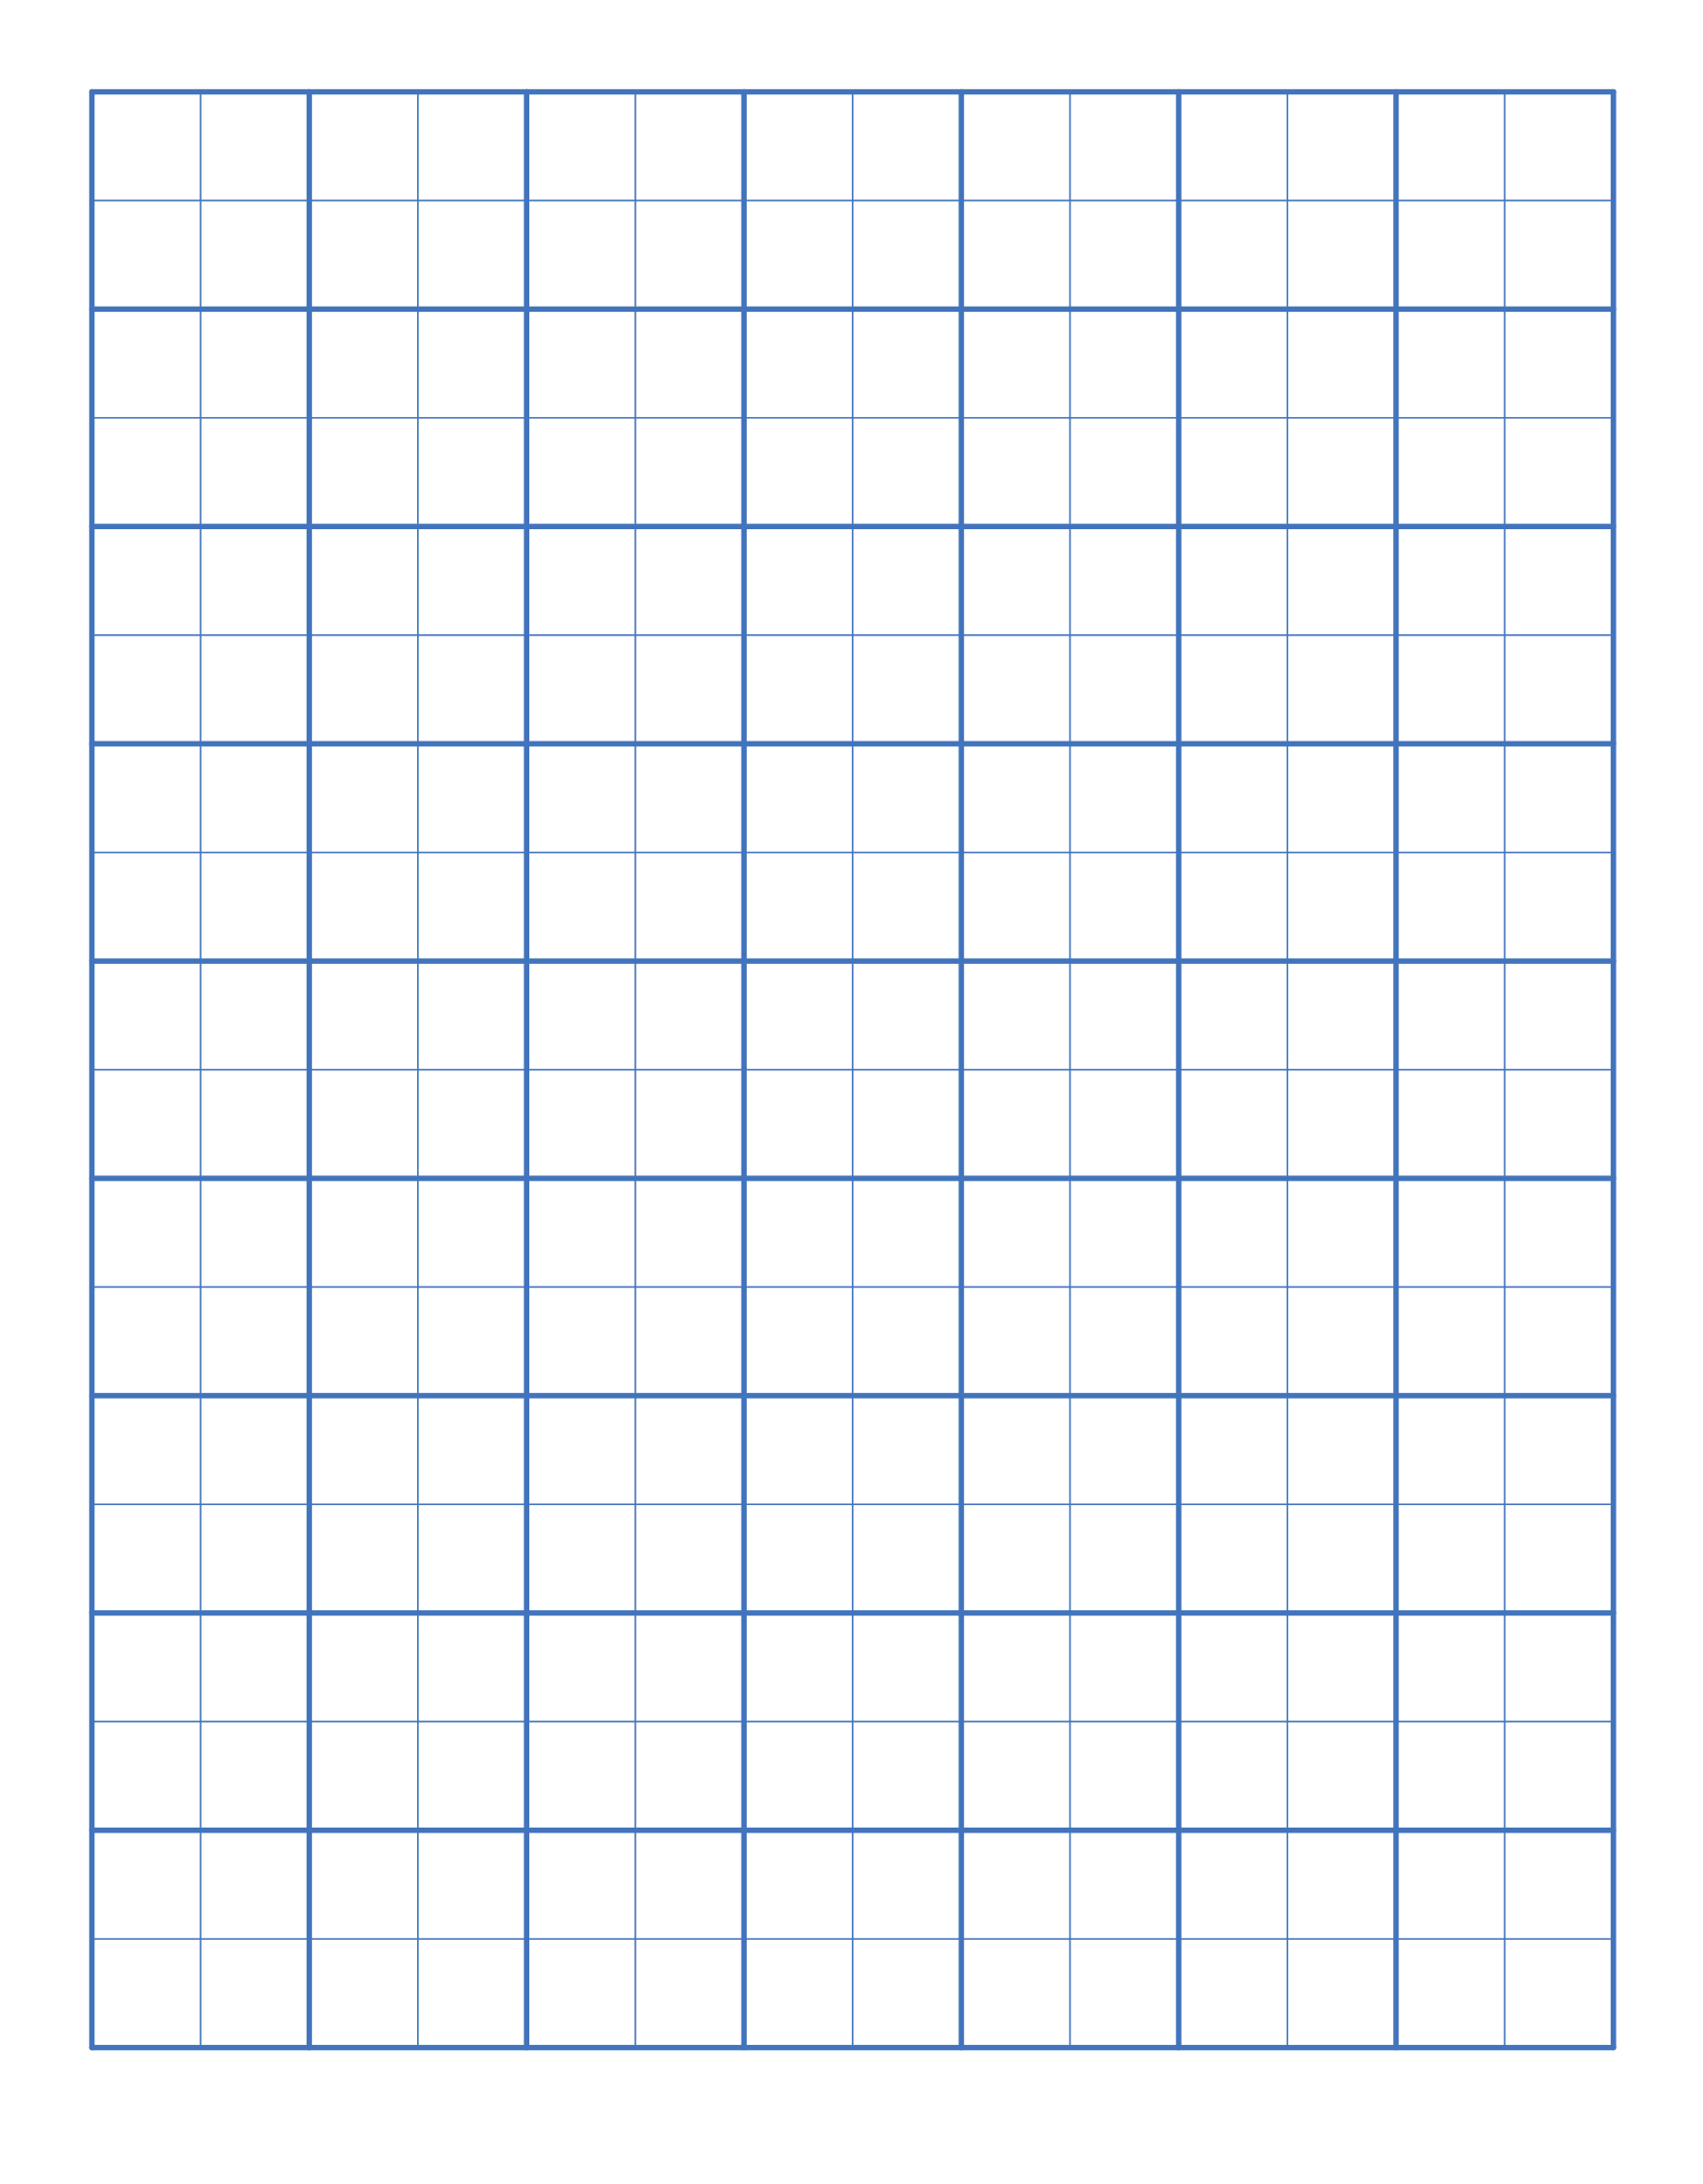 28+ Printable Graph Paper and Grid Paper Templates - Freebie Supply